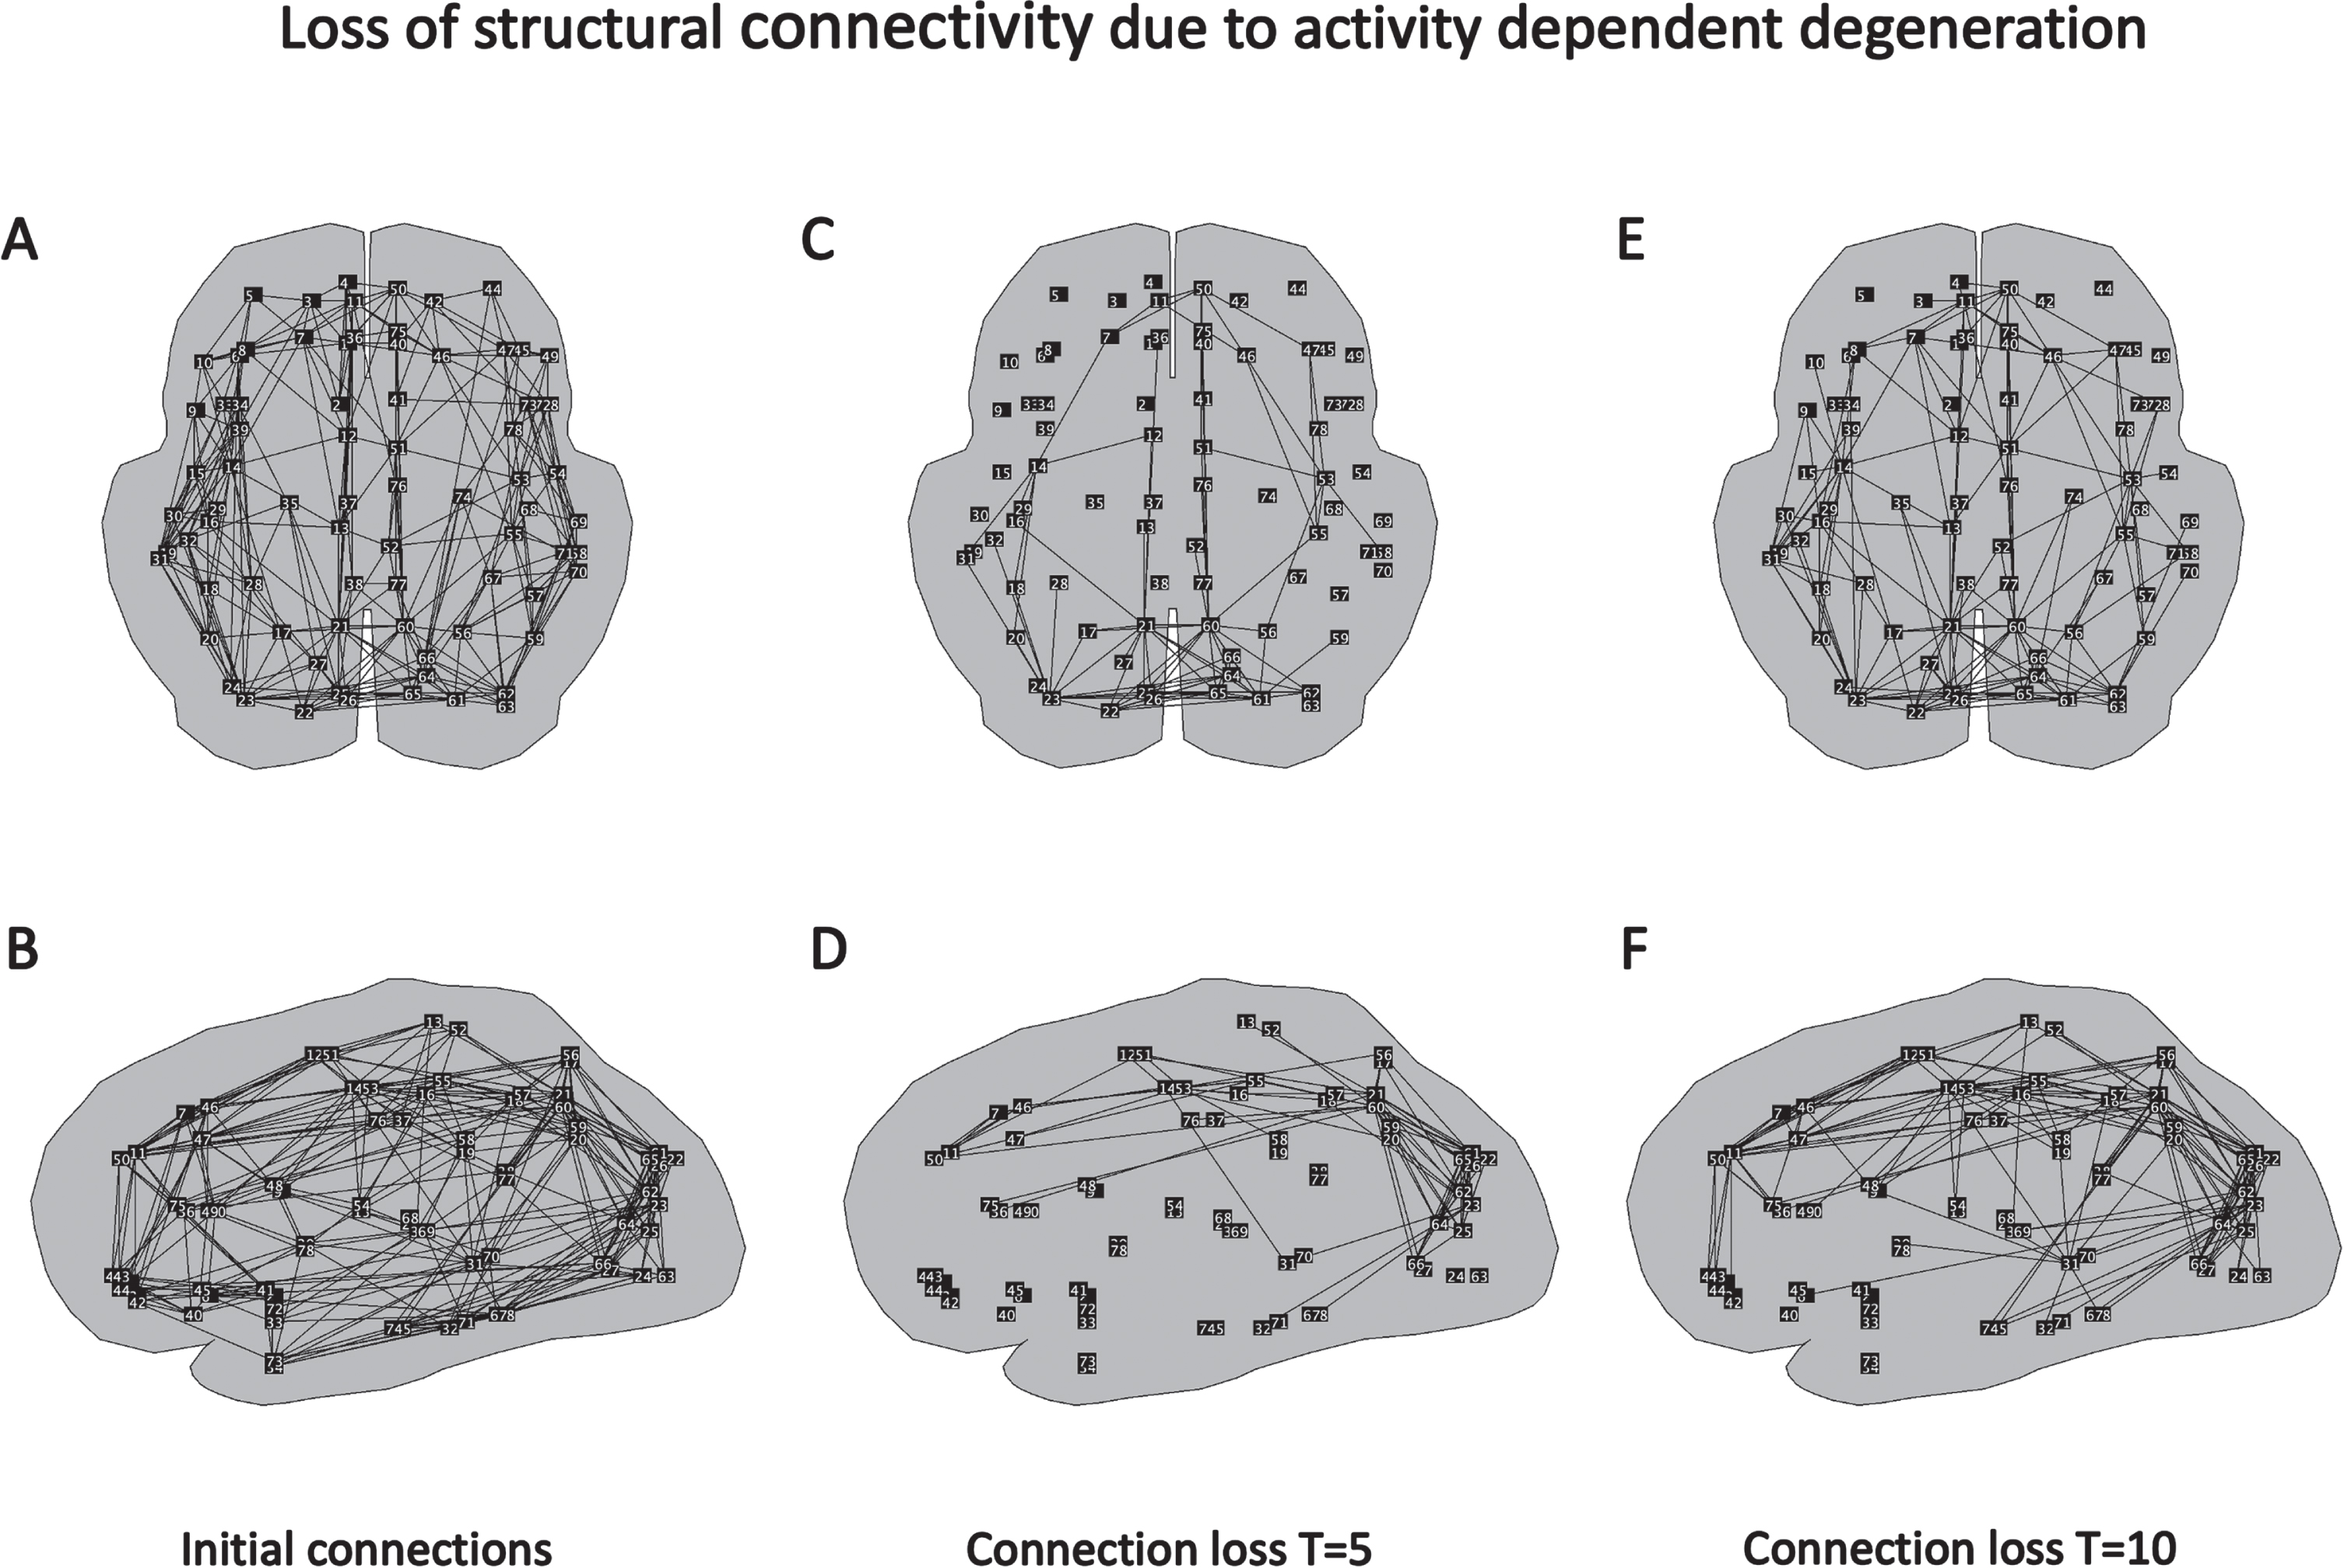 Spatial and temporal pattern of changes in structural connections in the global brain network induced by the ADD algorithm. A) Connections between brain regions in initial, healthy network, transversal view. B) Same network, sagittal view. C) Connections which have shown the strongest decrease in connection strength induced by the ADD algorithm at T = 5, transversal view. D) Same network, sagittal view. E) Connections with the strongest loss at T = 10, transversal view. F) Same network, sagittal view.